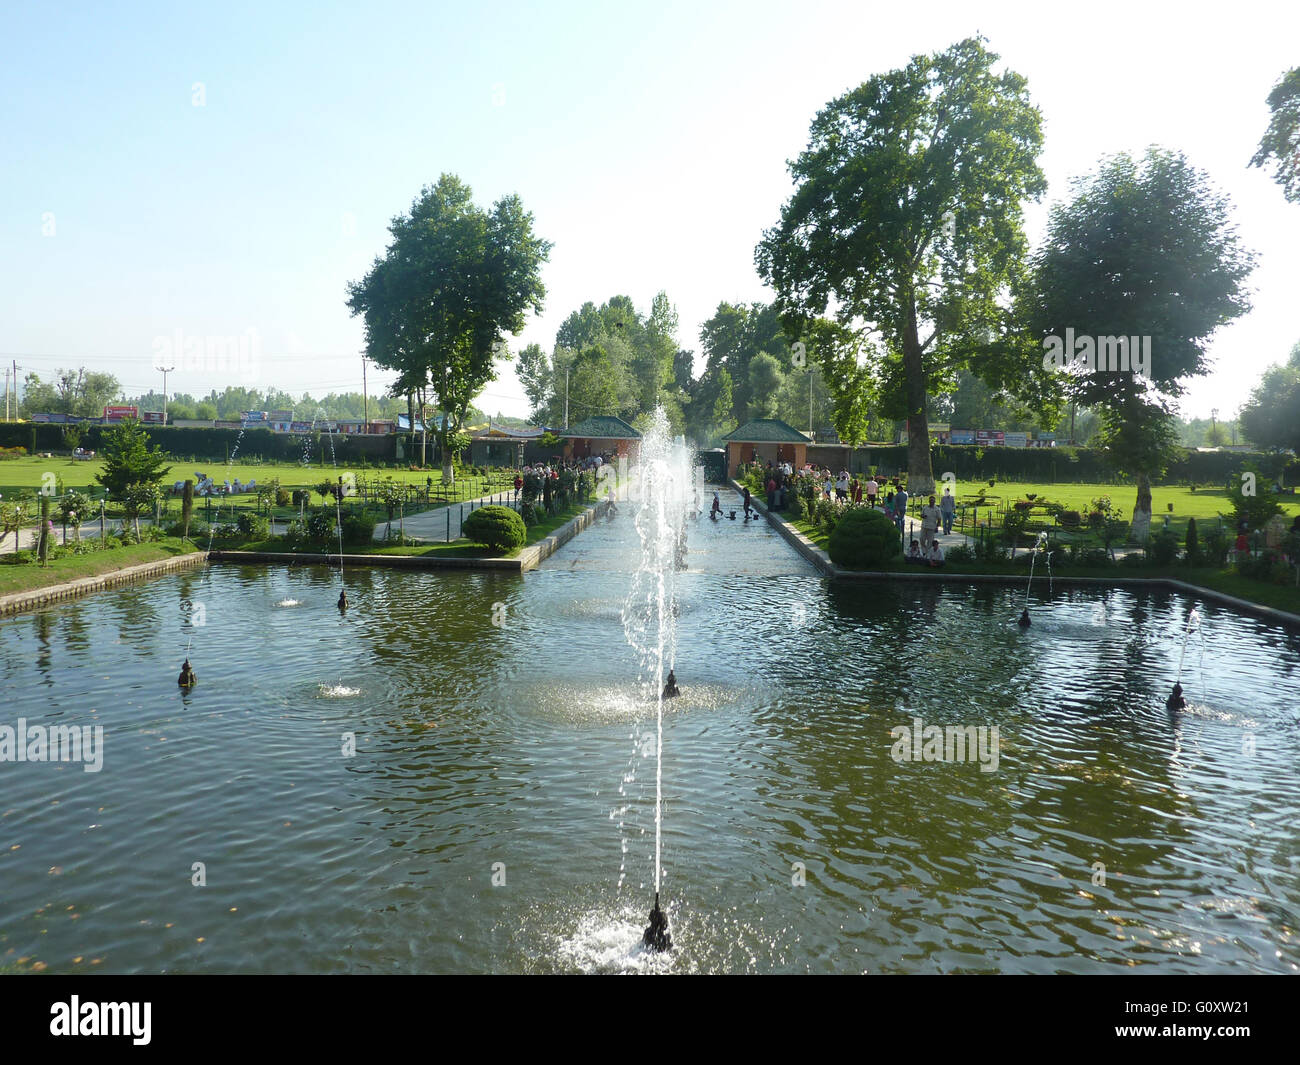 Shalimar Bagh, Moghul Garden on the banks of Dal Lake, Srinagar, Kashmir, a terraced garden with central channel with fountains Stock Photo